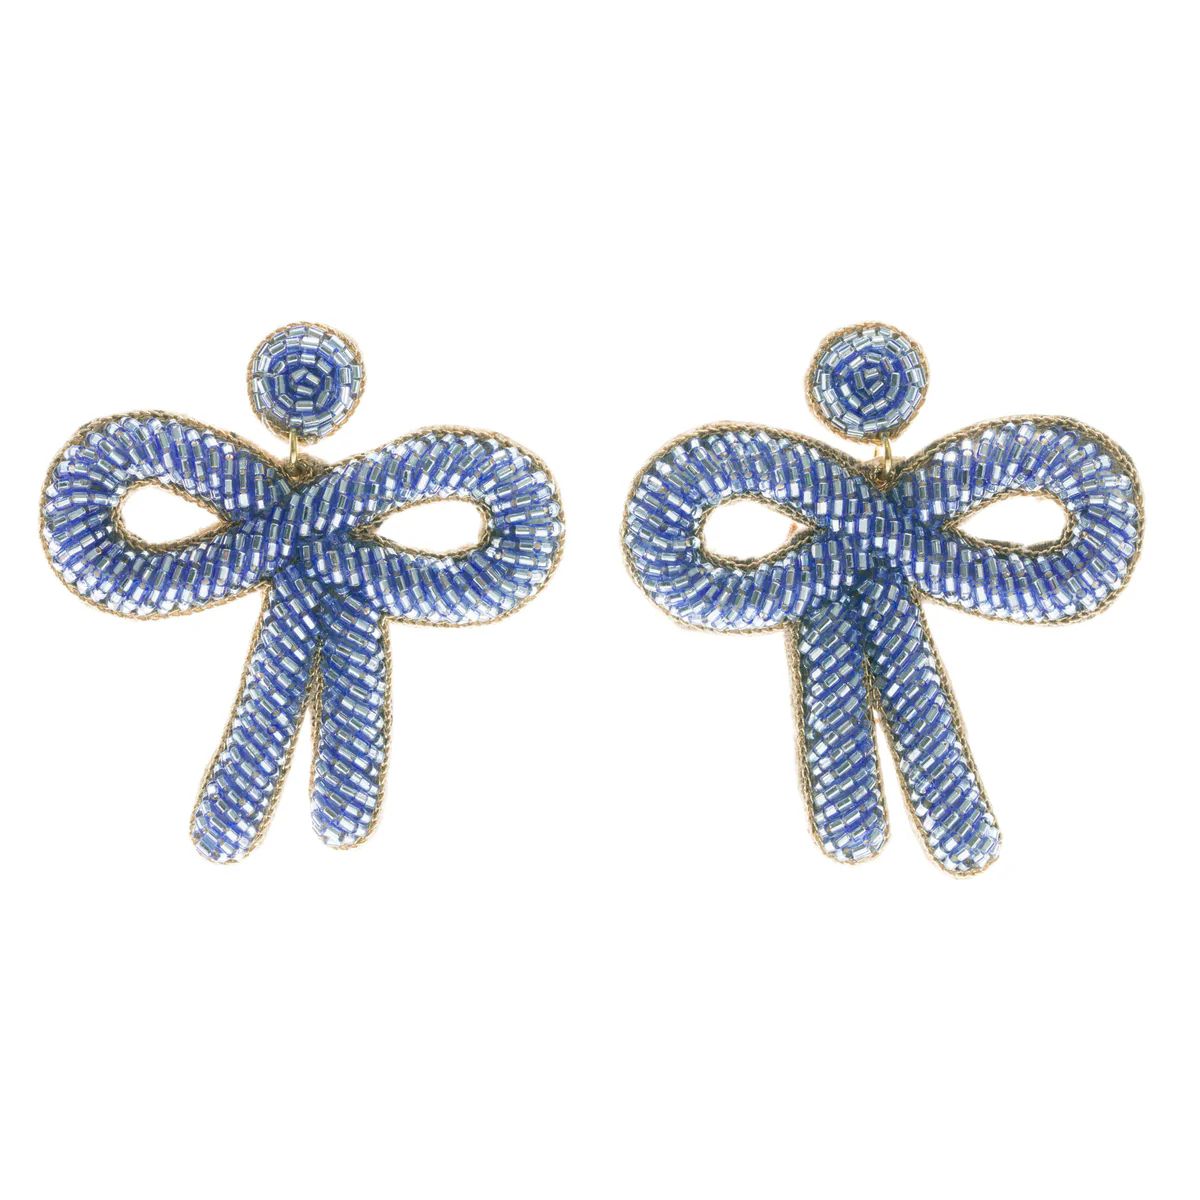 Periwinkle Bow Earrings | Beth Ladd Collections